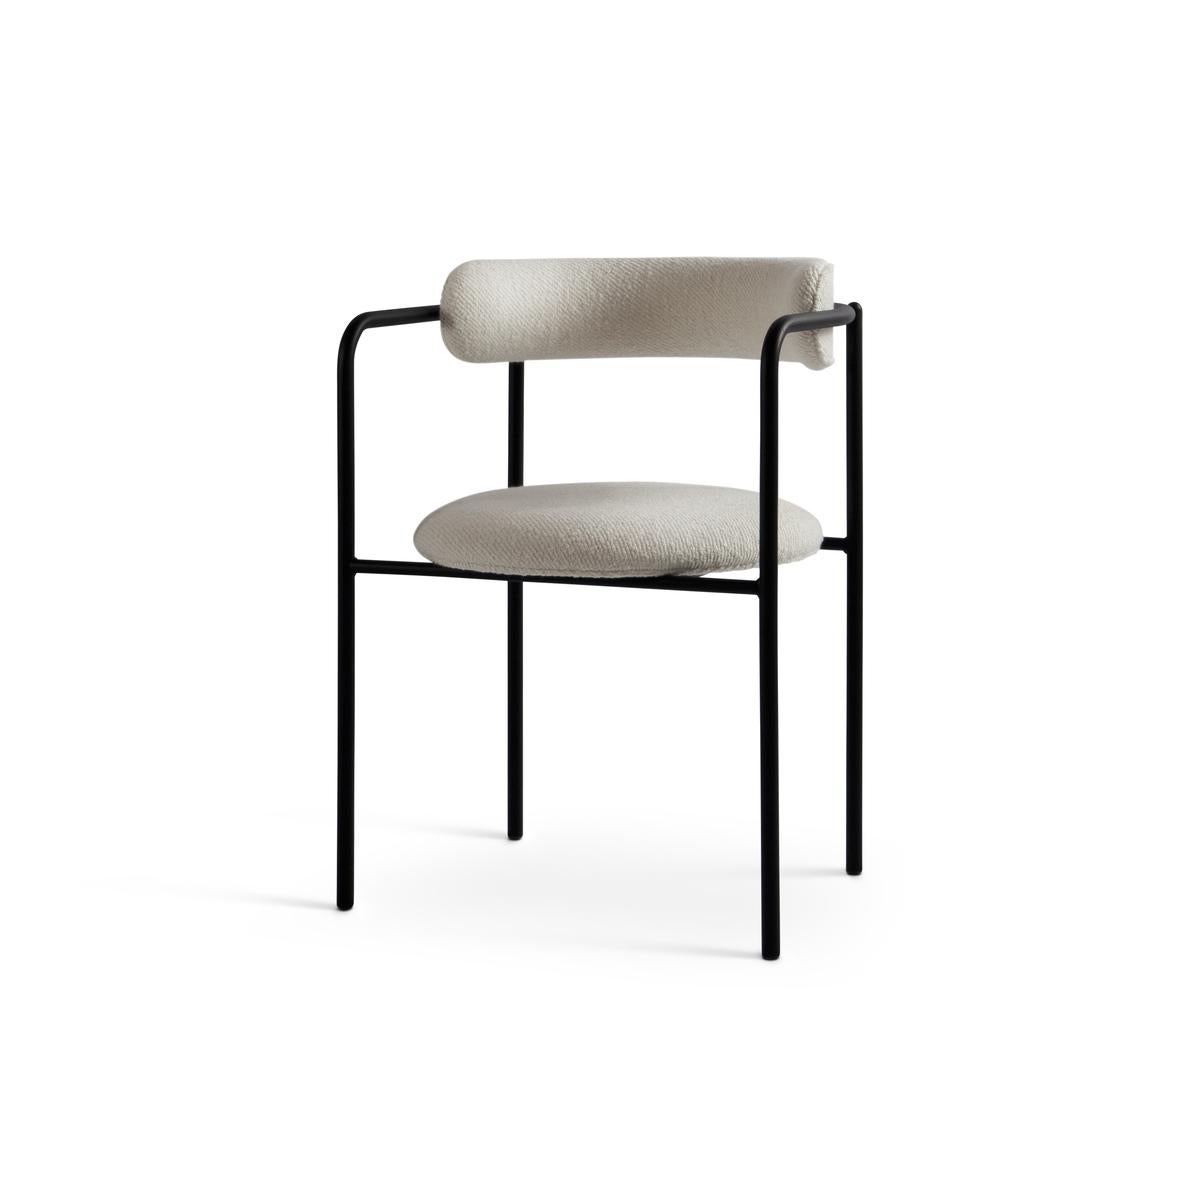 Contemporary Chair 'FF 4-Legs', Vidar Fabric, Black 1880 and White 1511 For Sale 8